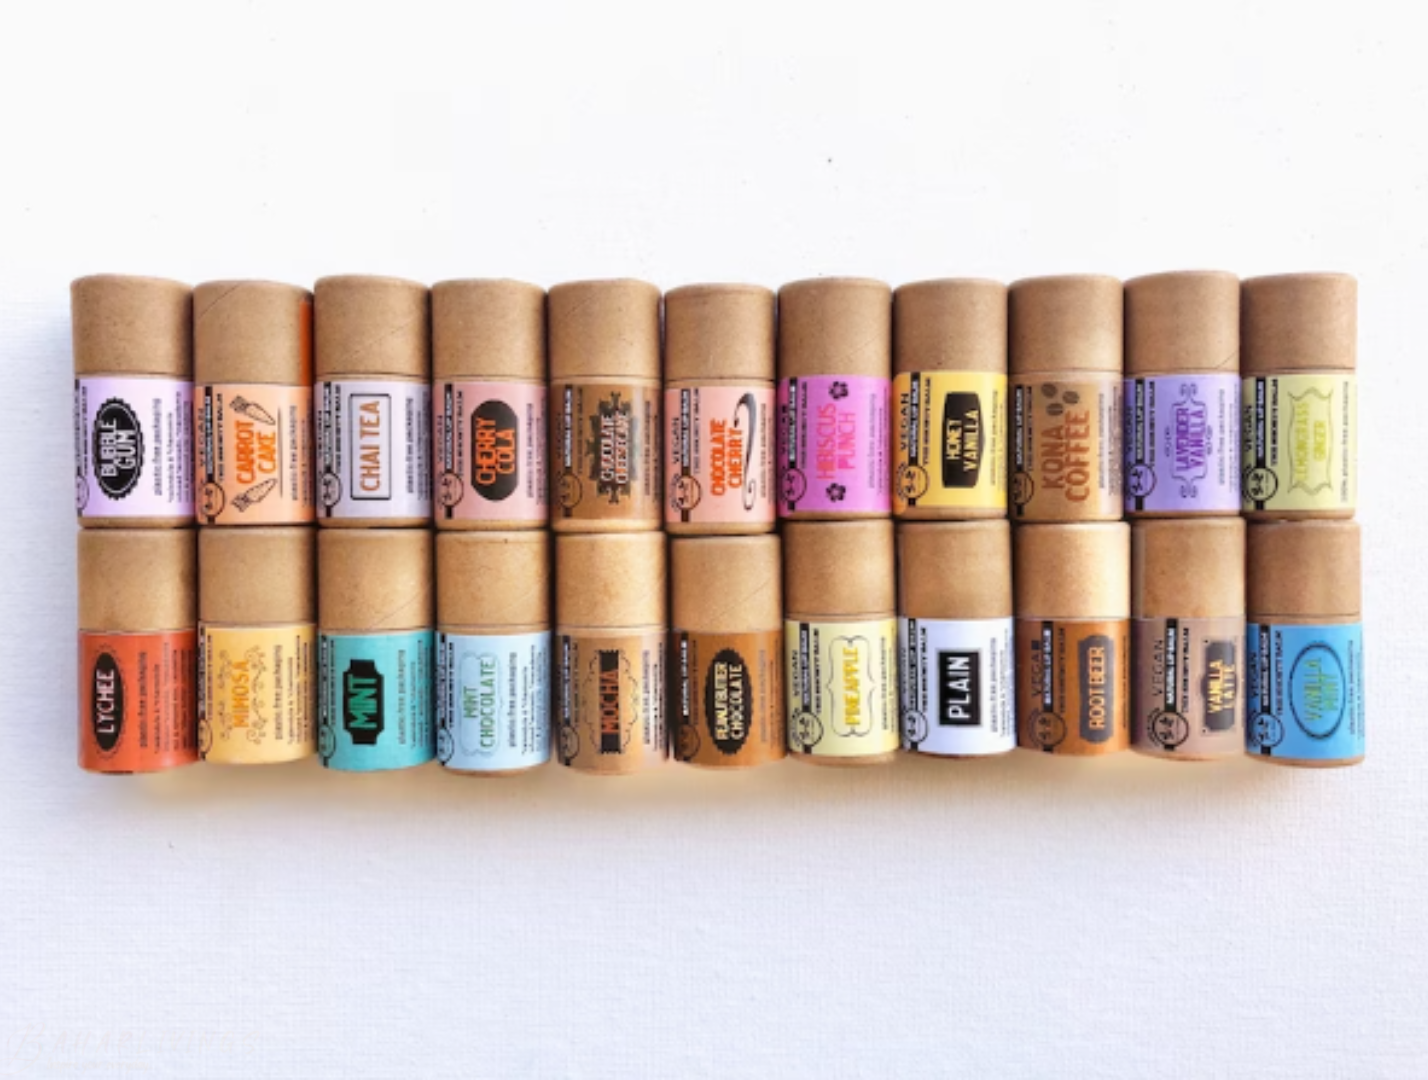 Practical gift idea for teens: Handmade lip balm with delicious flavors and eco-friendly packaging.